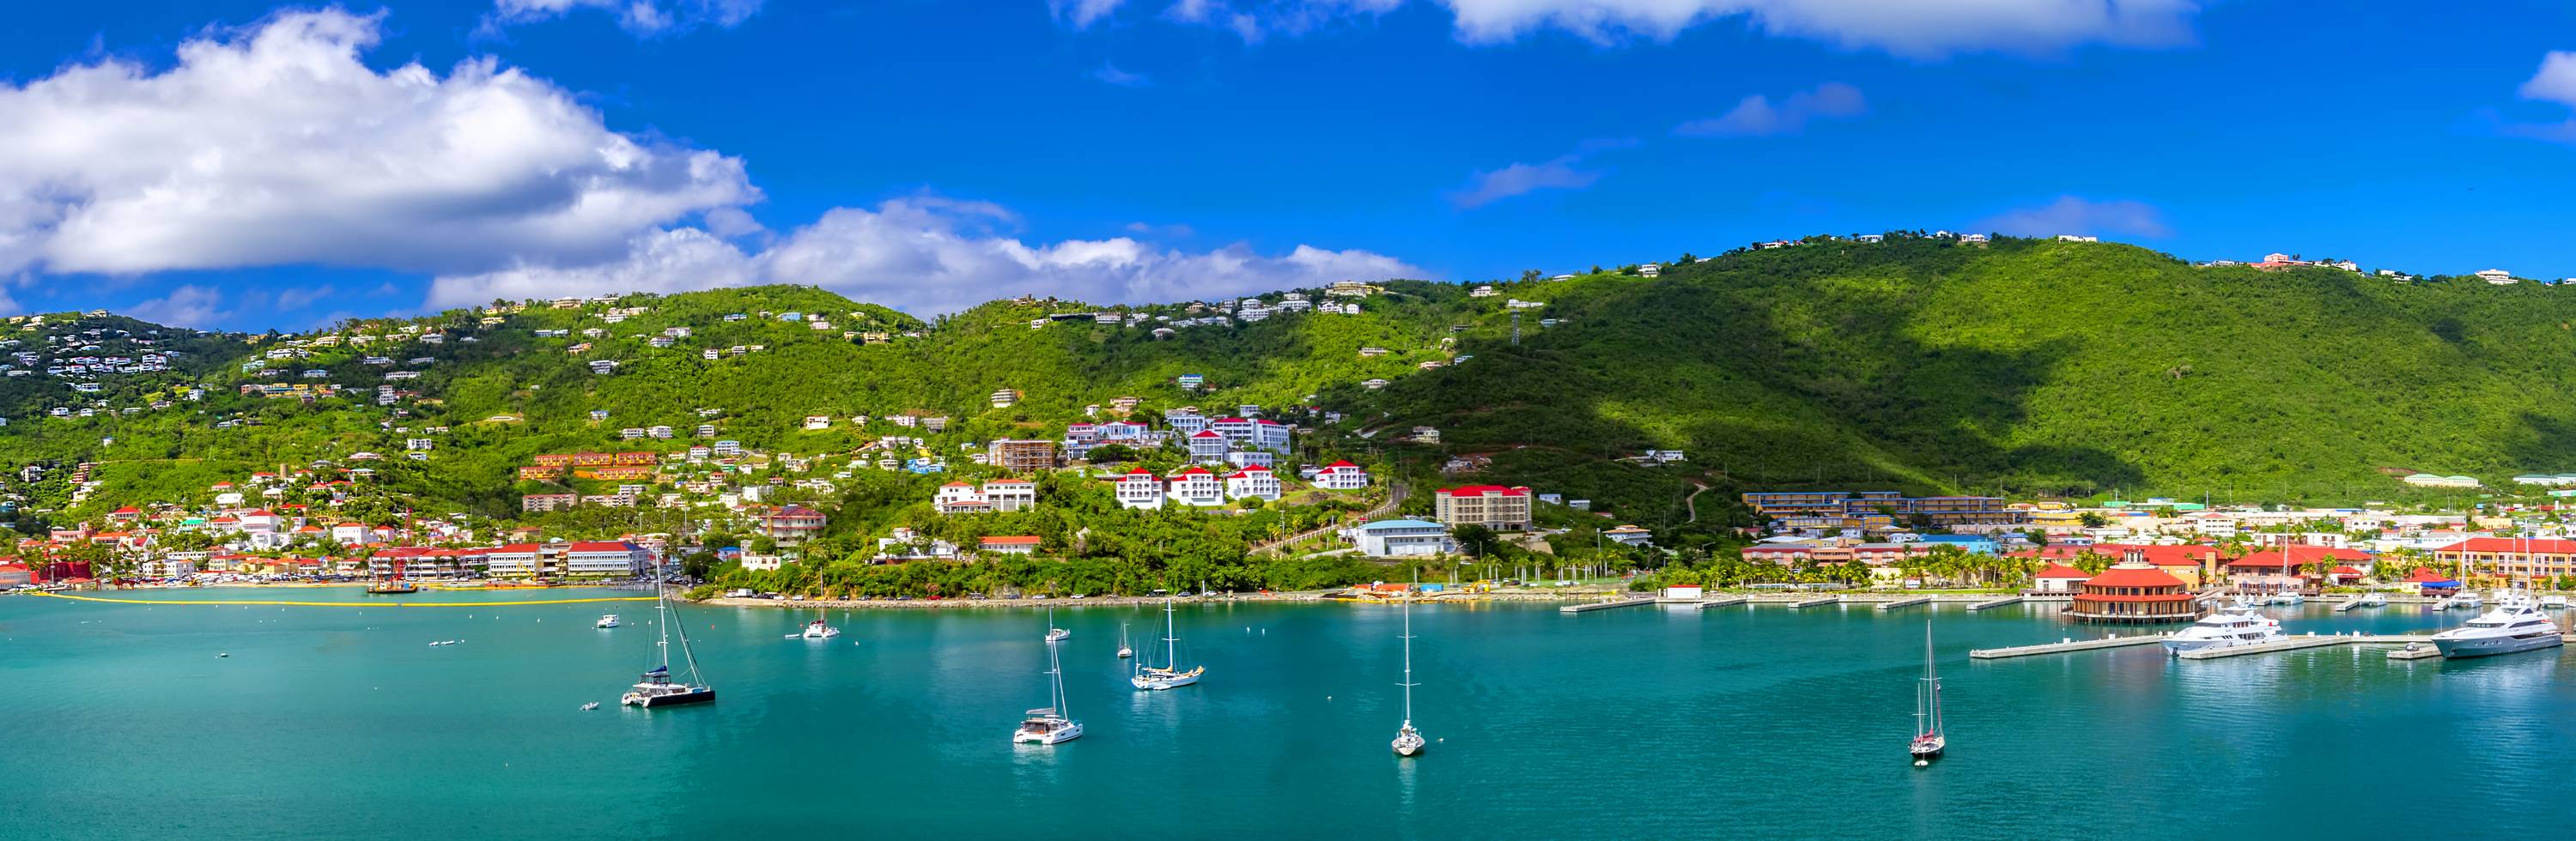 BGYB Destination : Suggested itinerary for a cruise in the US Virgin Islands